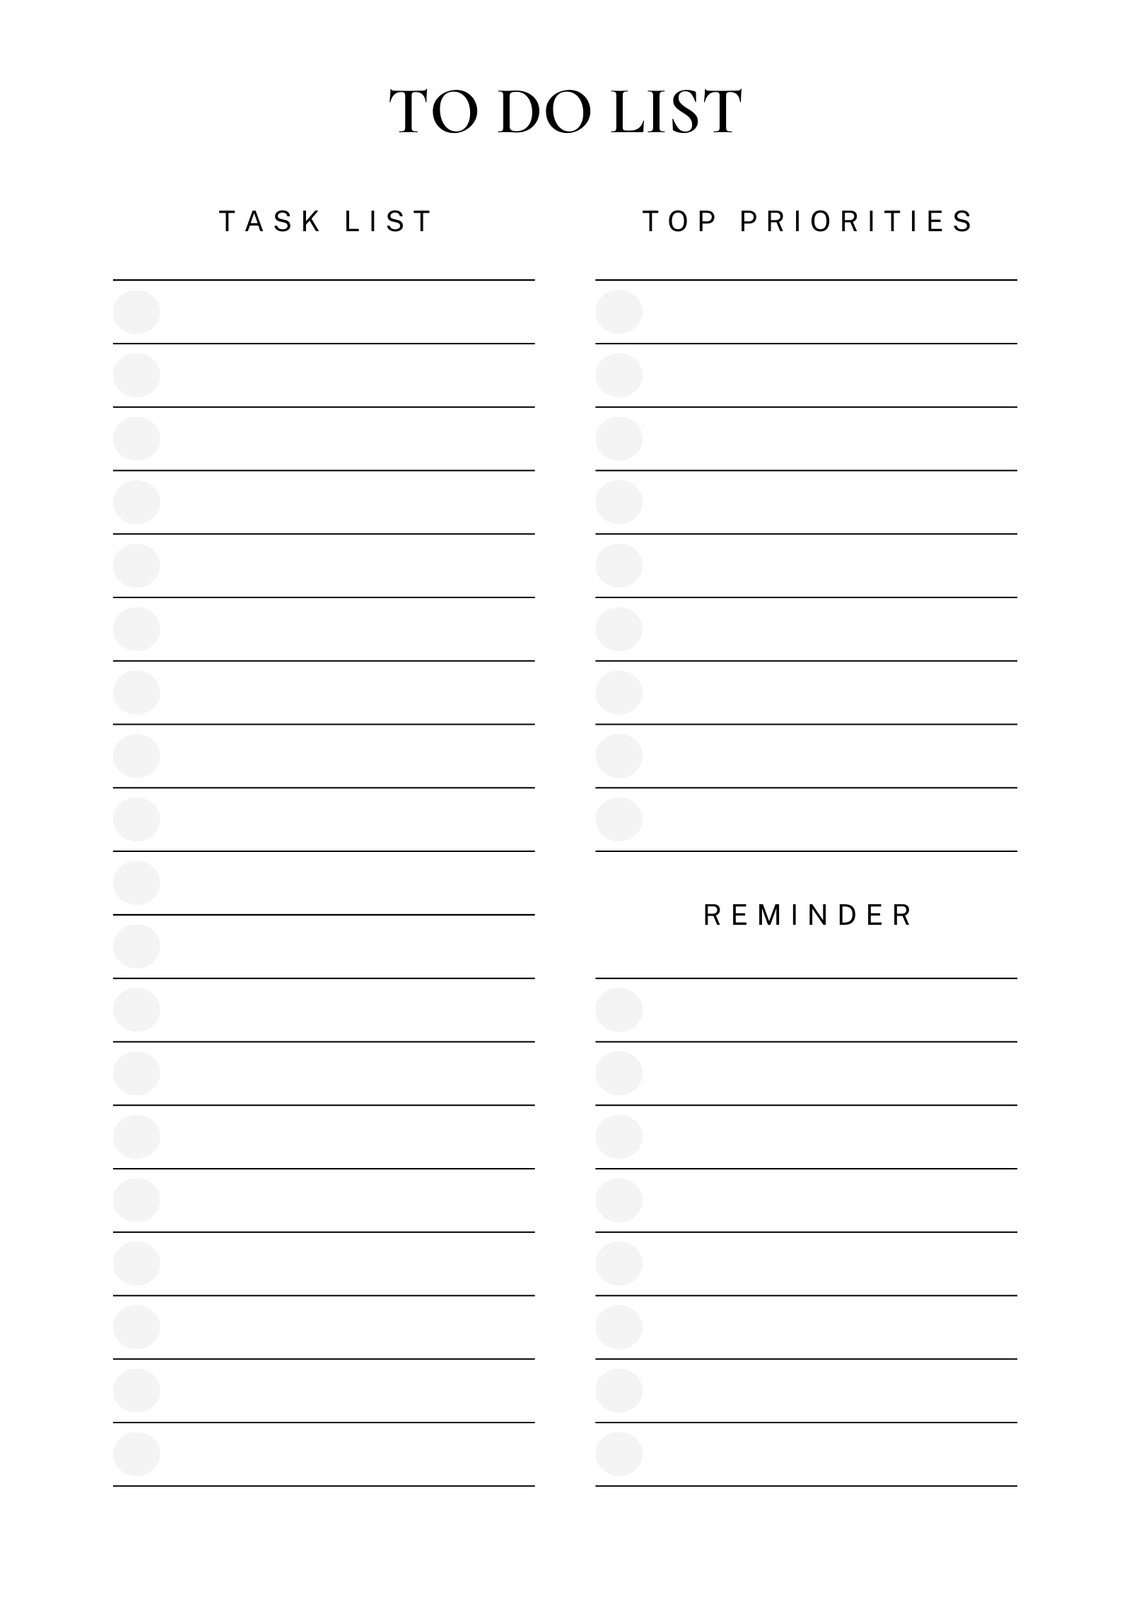 To Do List Plantilla Free and customizable to do list templates